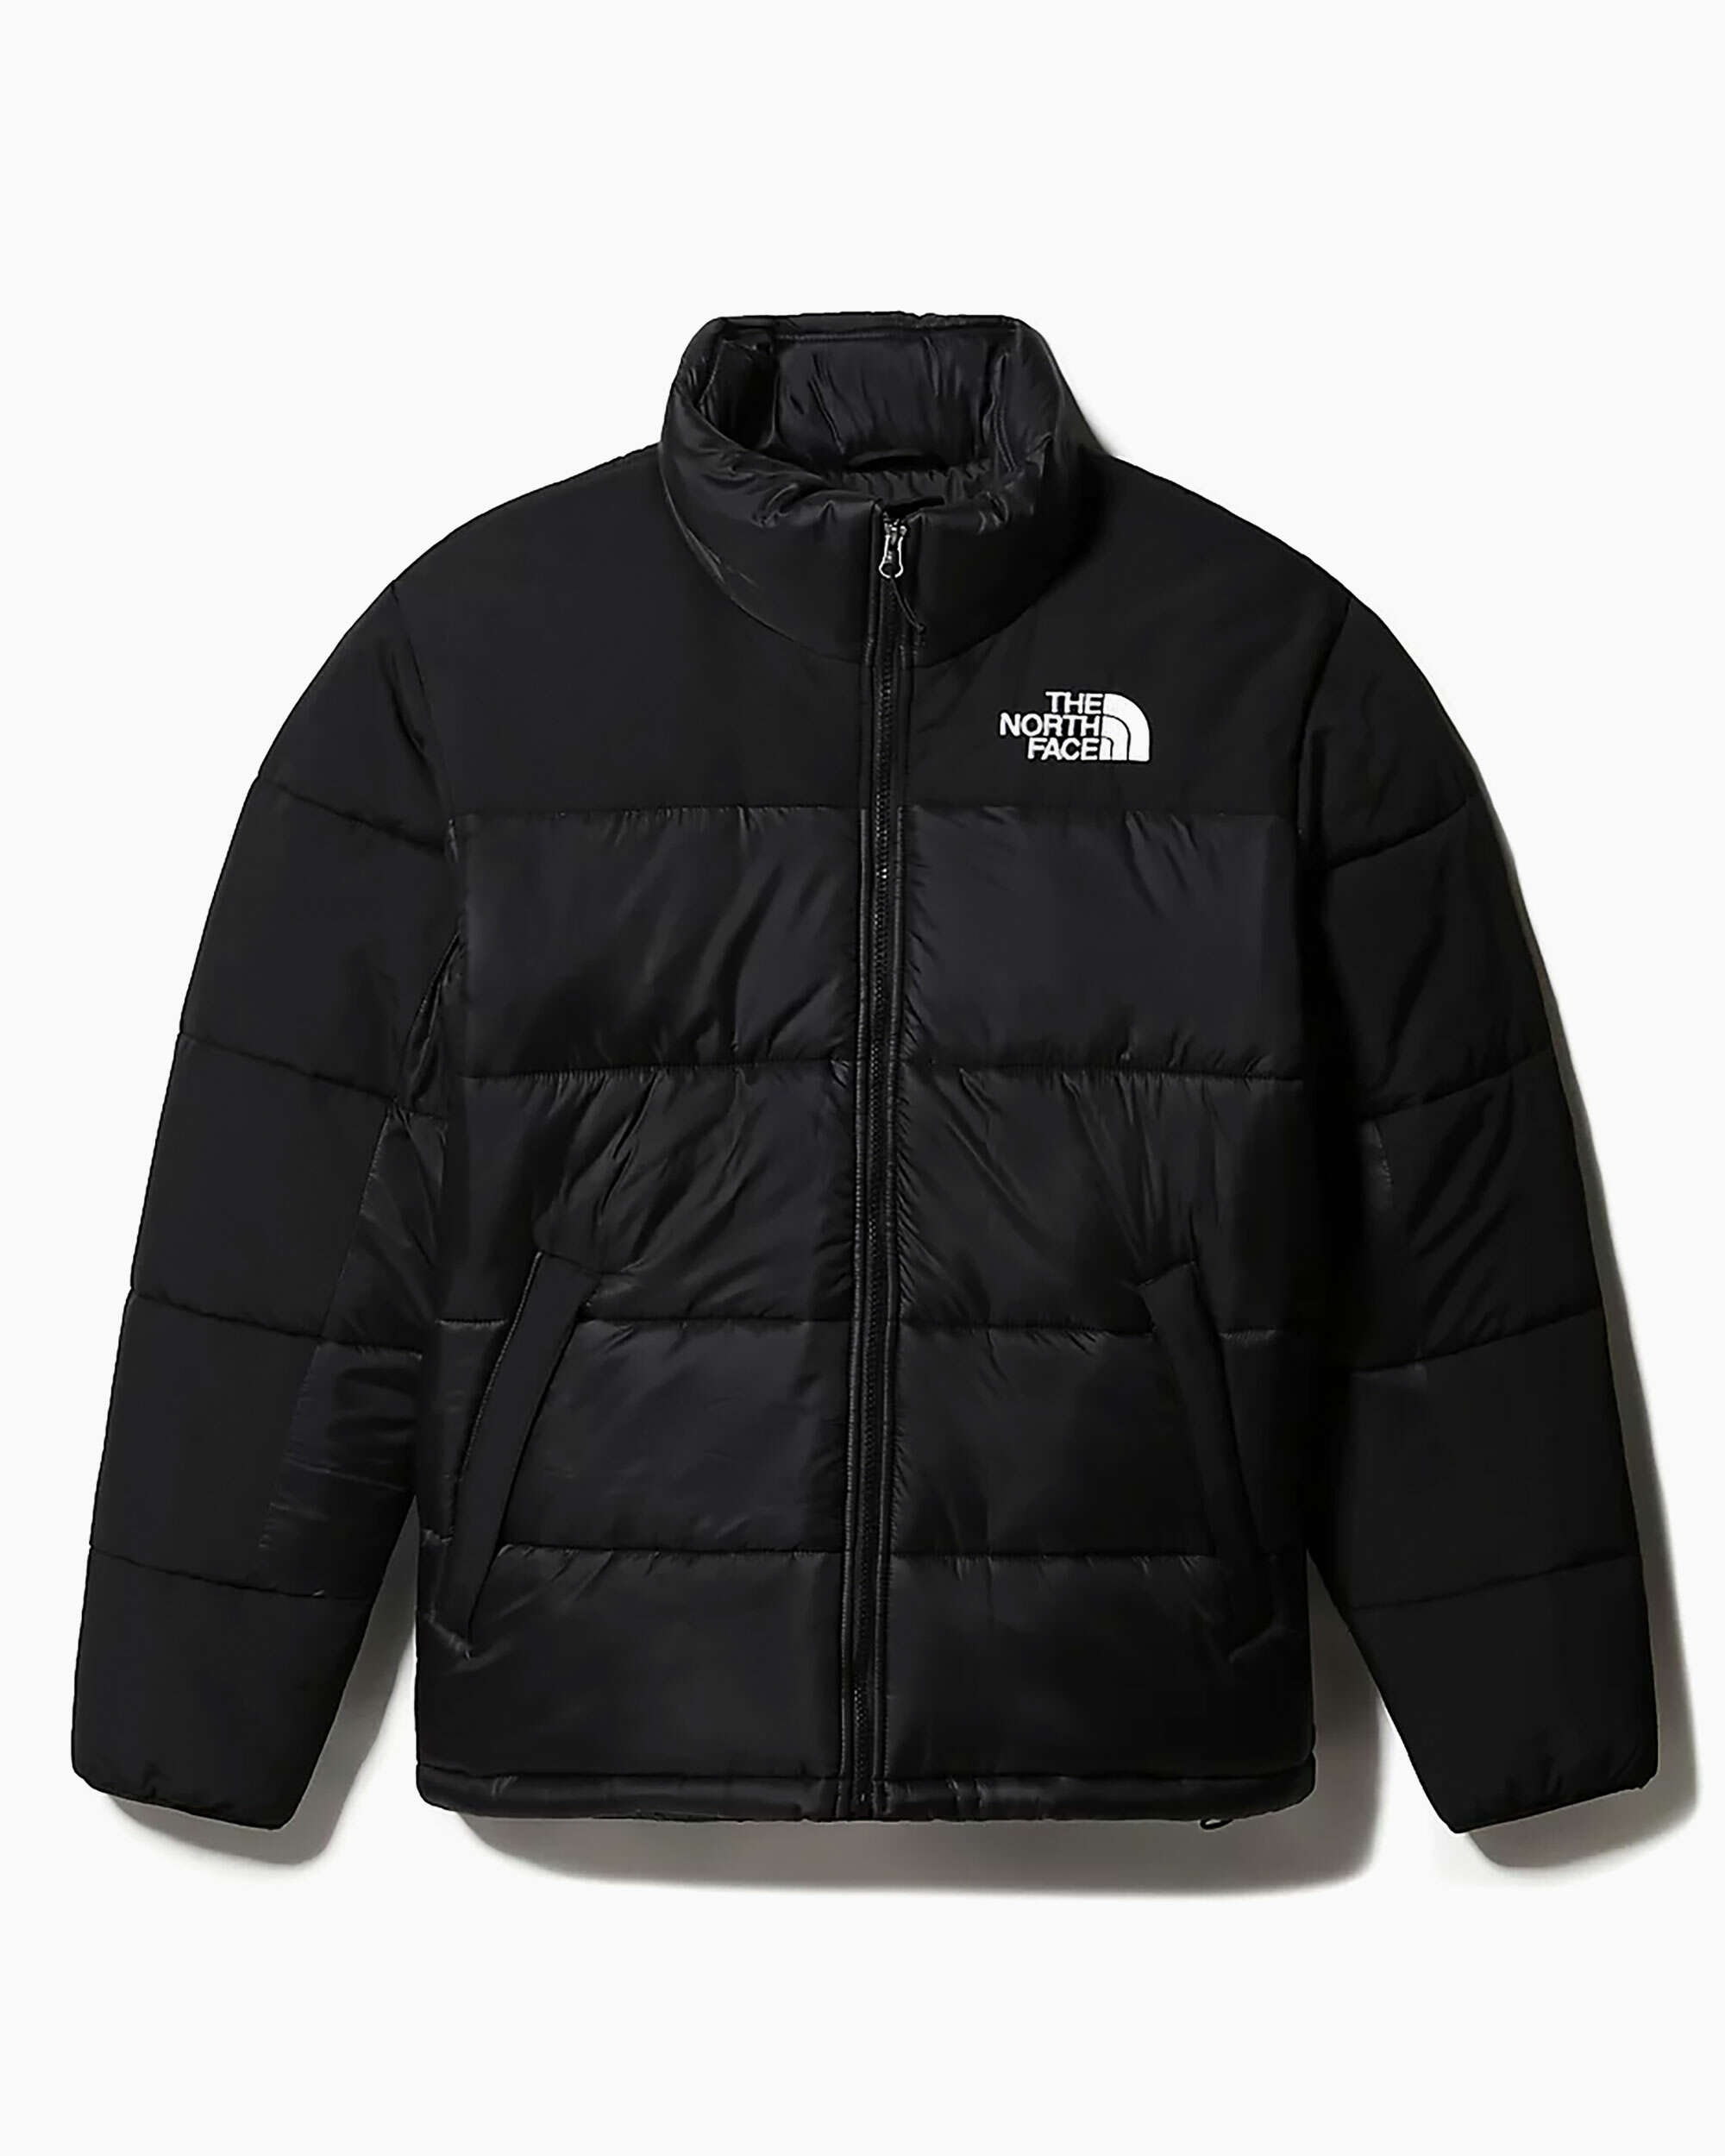 The North Face Himalayan Insulated Men's Jacket Black NF0A4QYZJK31